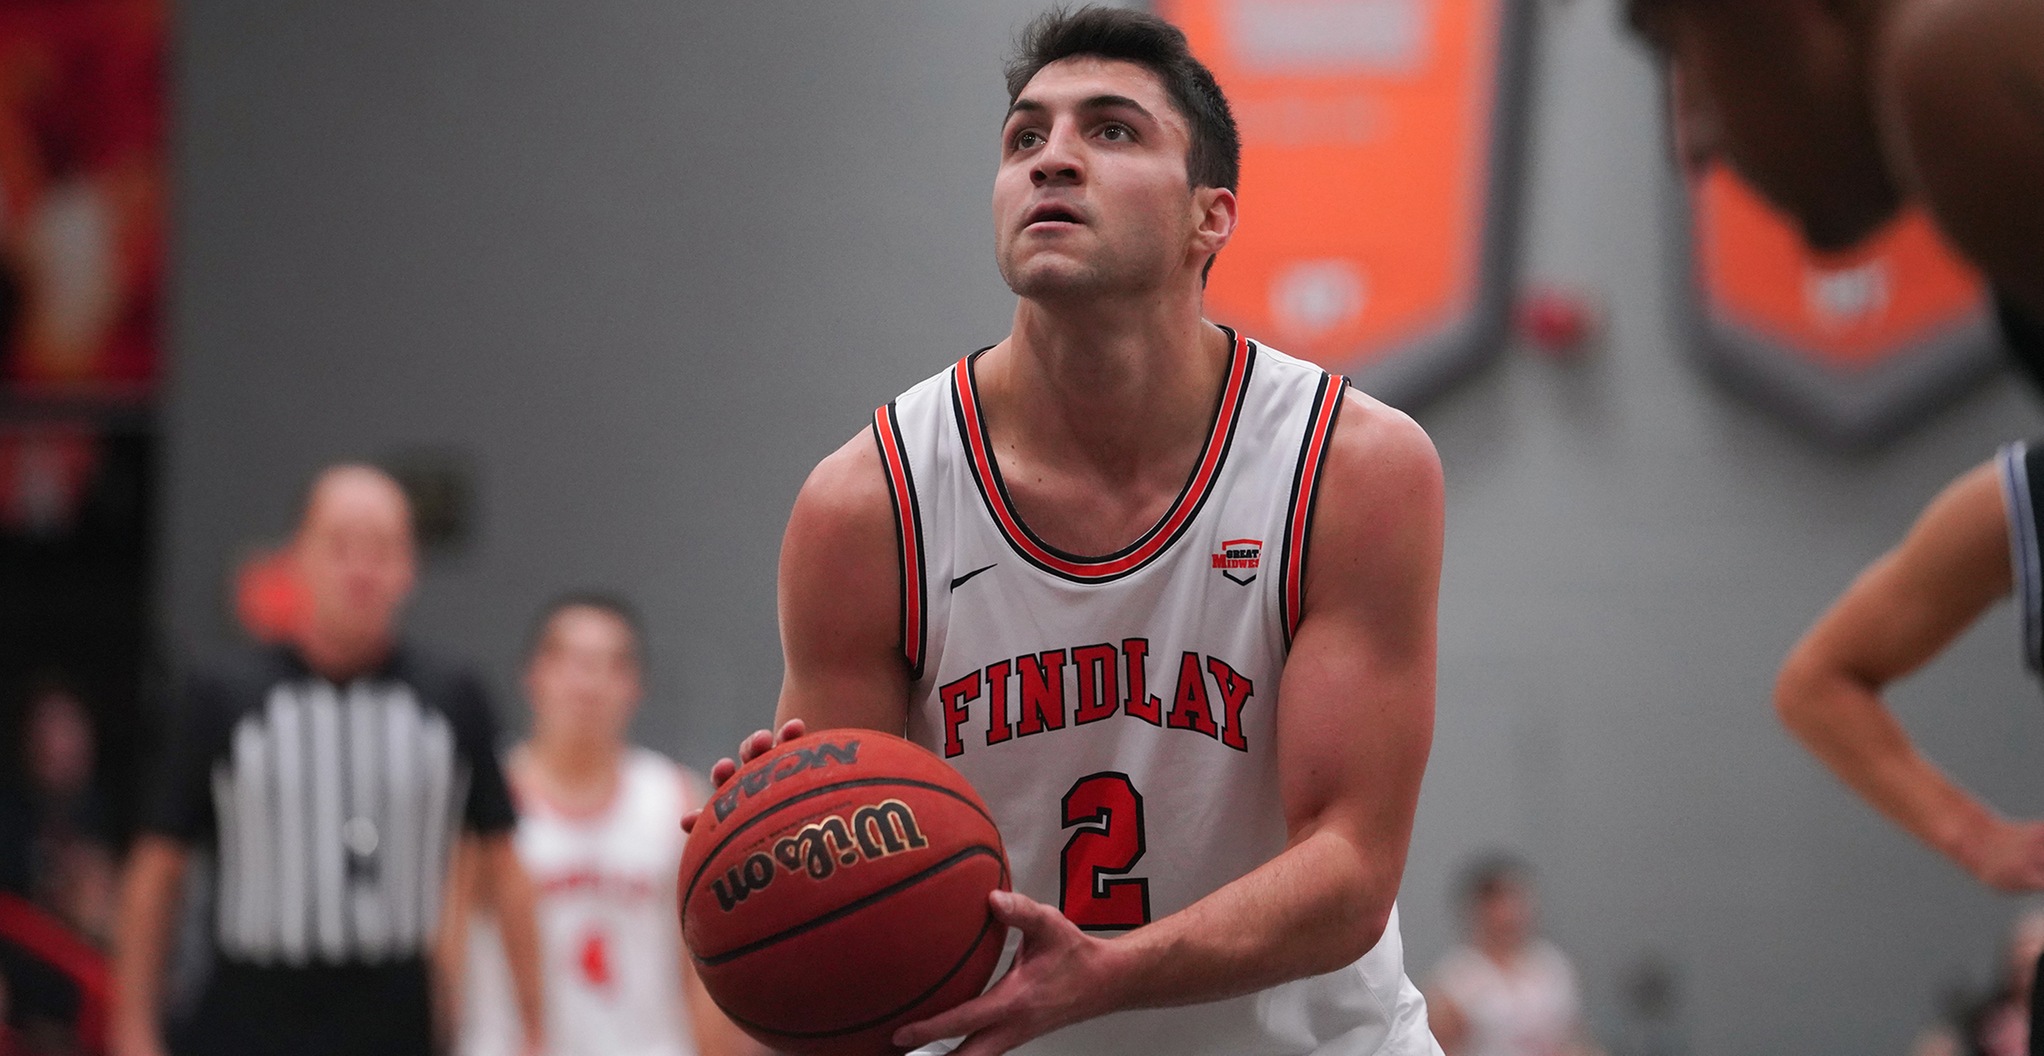 Oilers Cruise to 79-55 Win at Ohio Valley